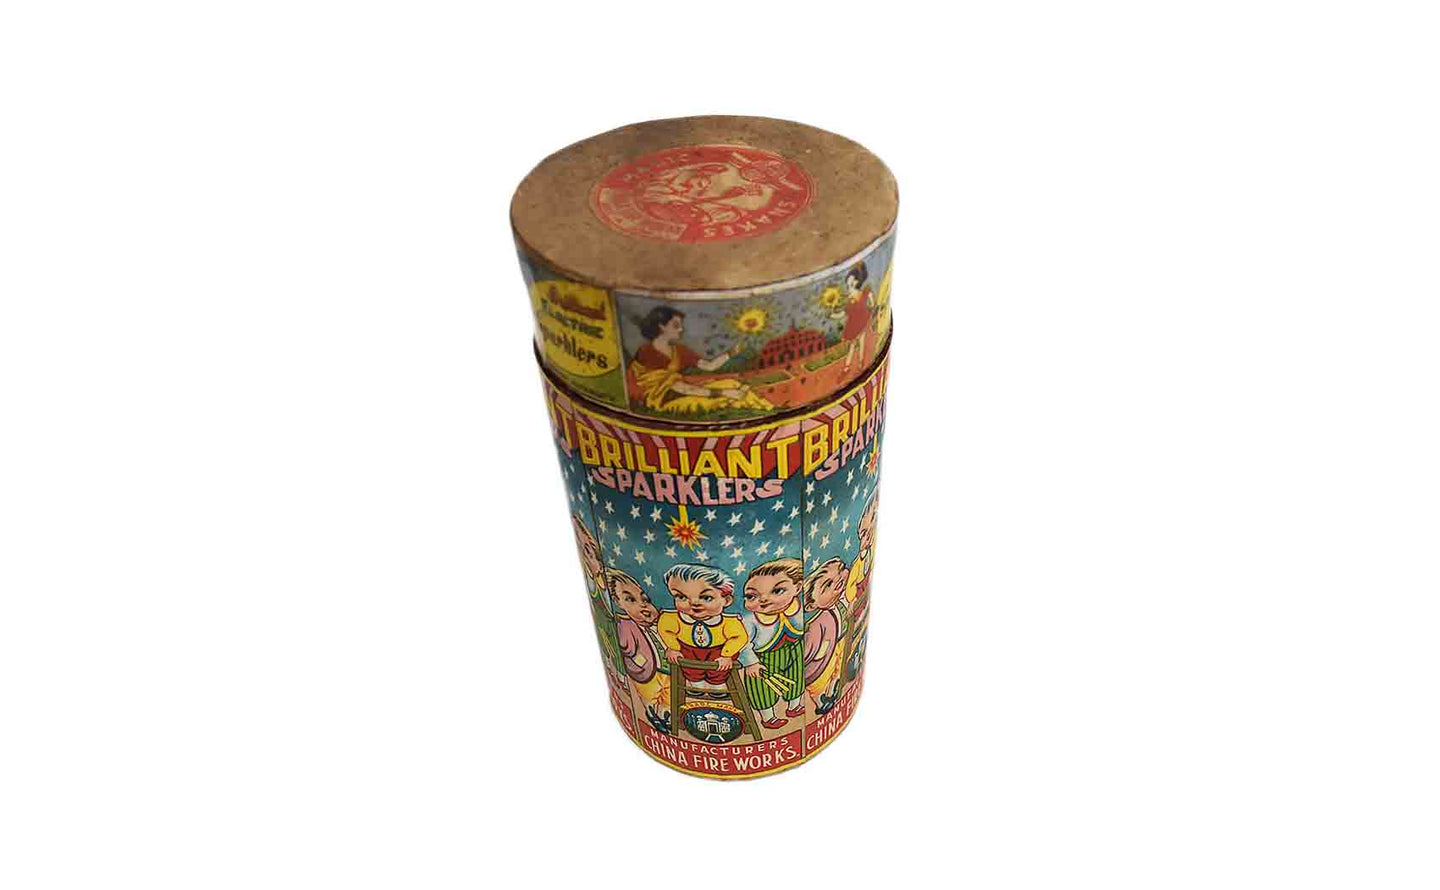 Brilliant Sparklers Tube from India